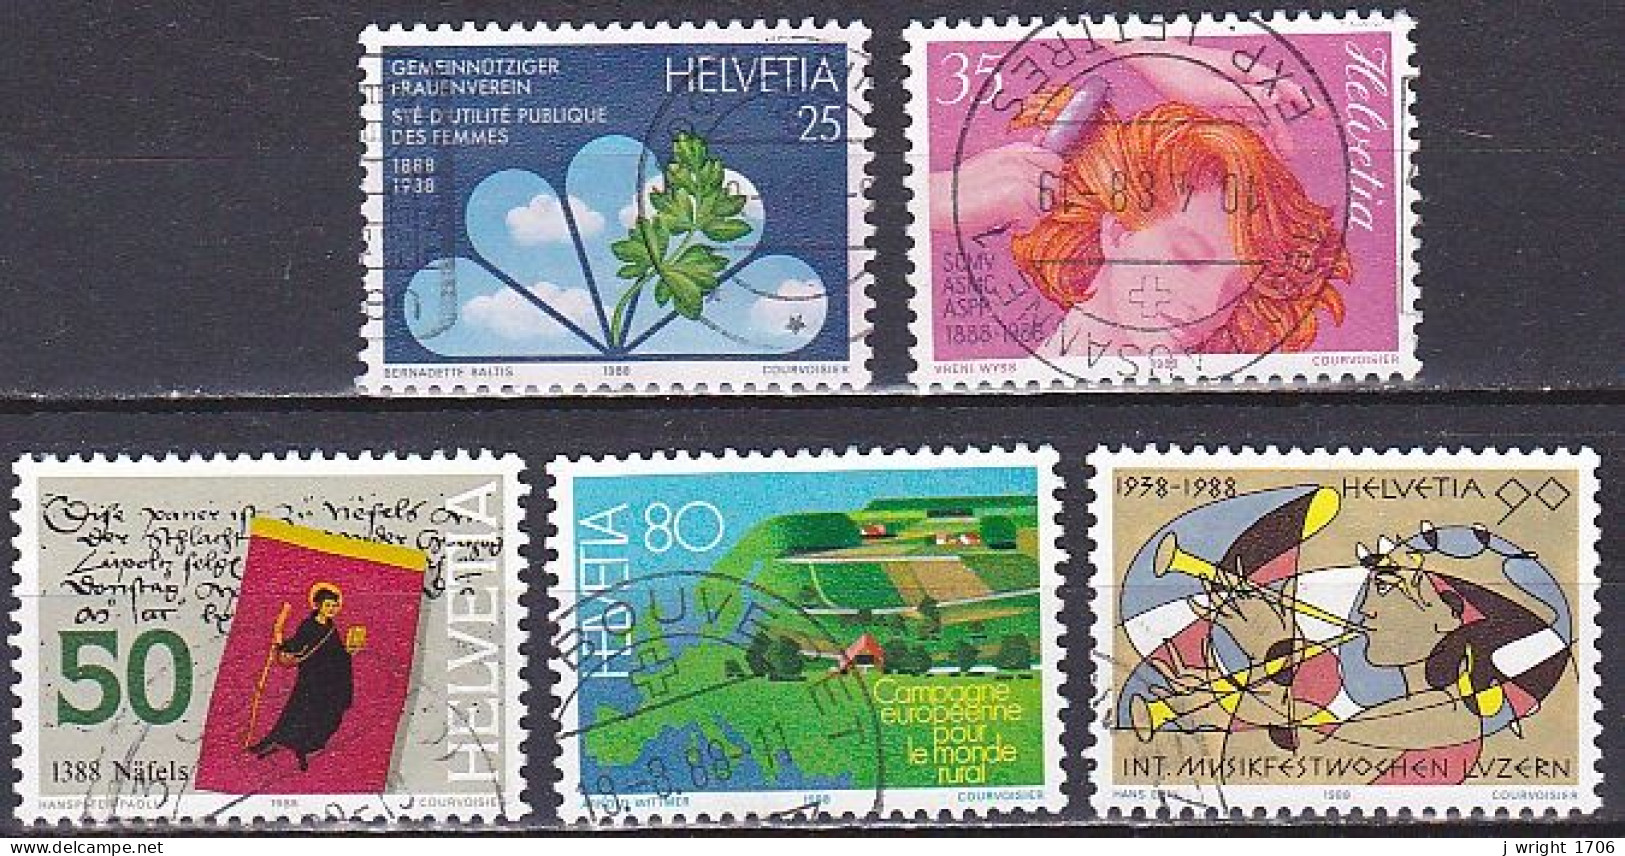 Switzerland, 1988, Publicity Issue, Set, USED - Used Stamps